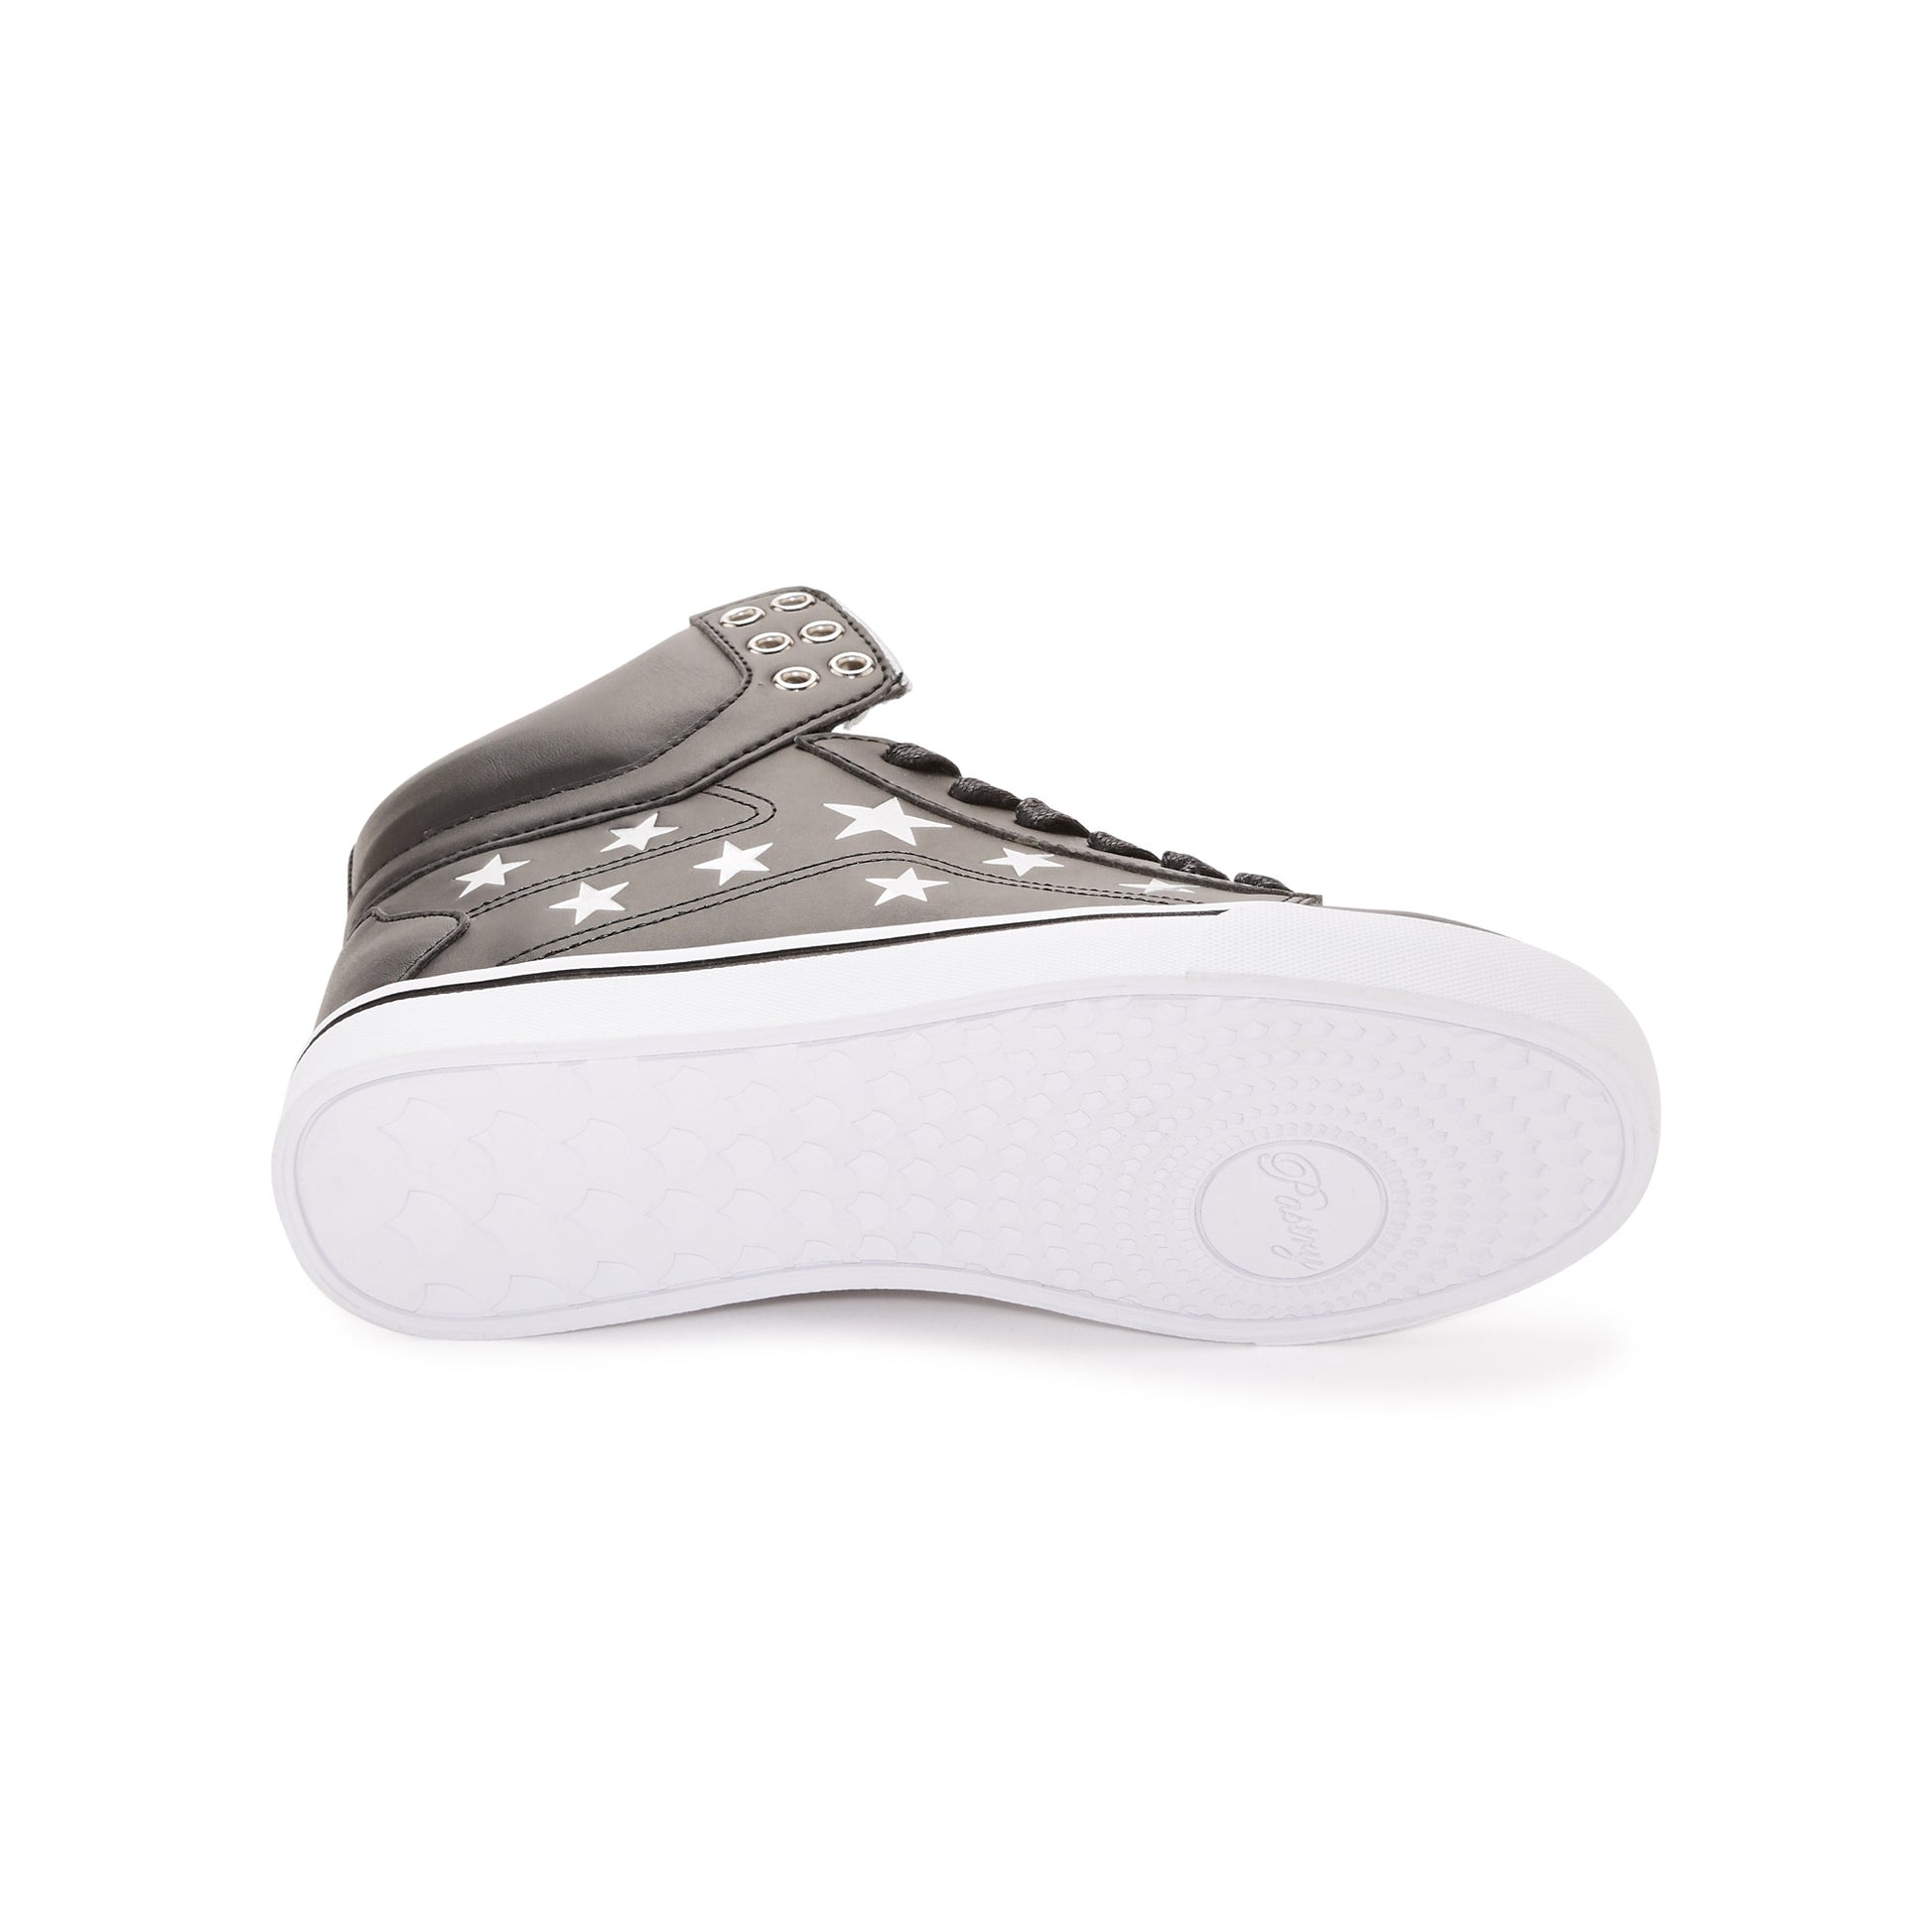 Pastry Pop Tart Star Youth Sneaker in Black/Silver outsole view